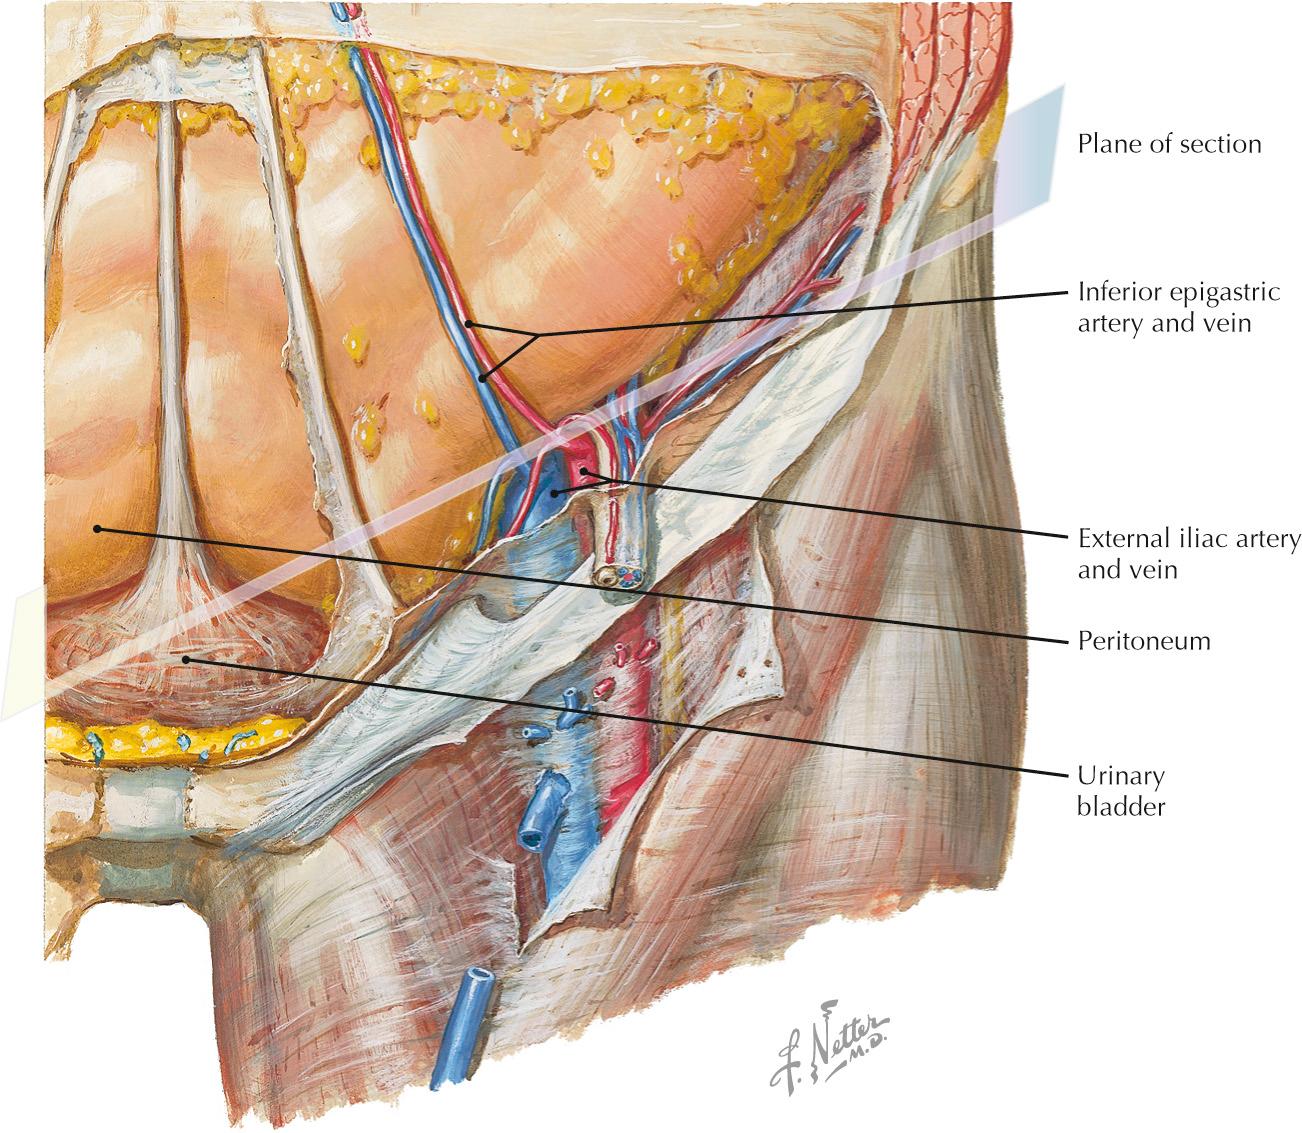 Anterior view of the inguinal region